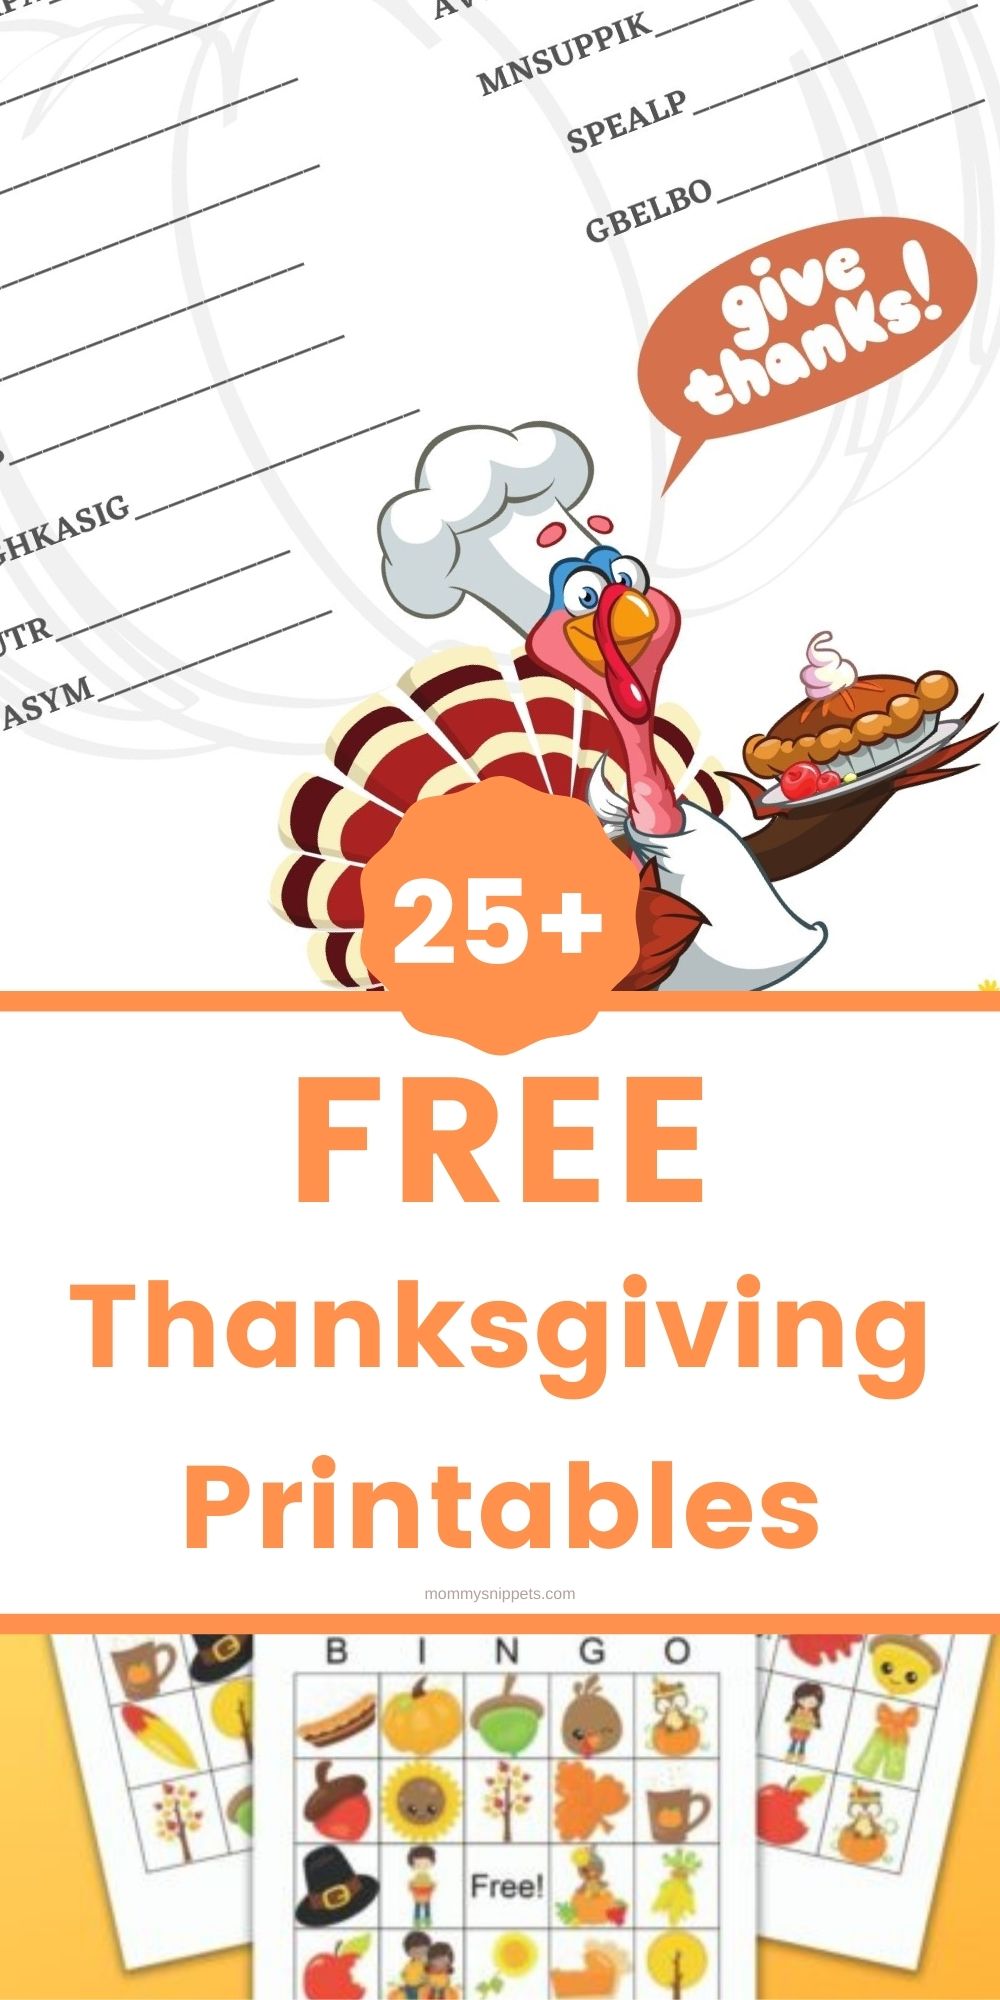 Over 25 Free Thanksgiving Printables- MommySnippets.com